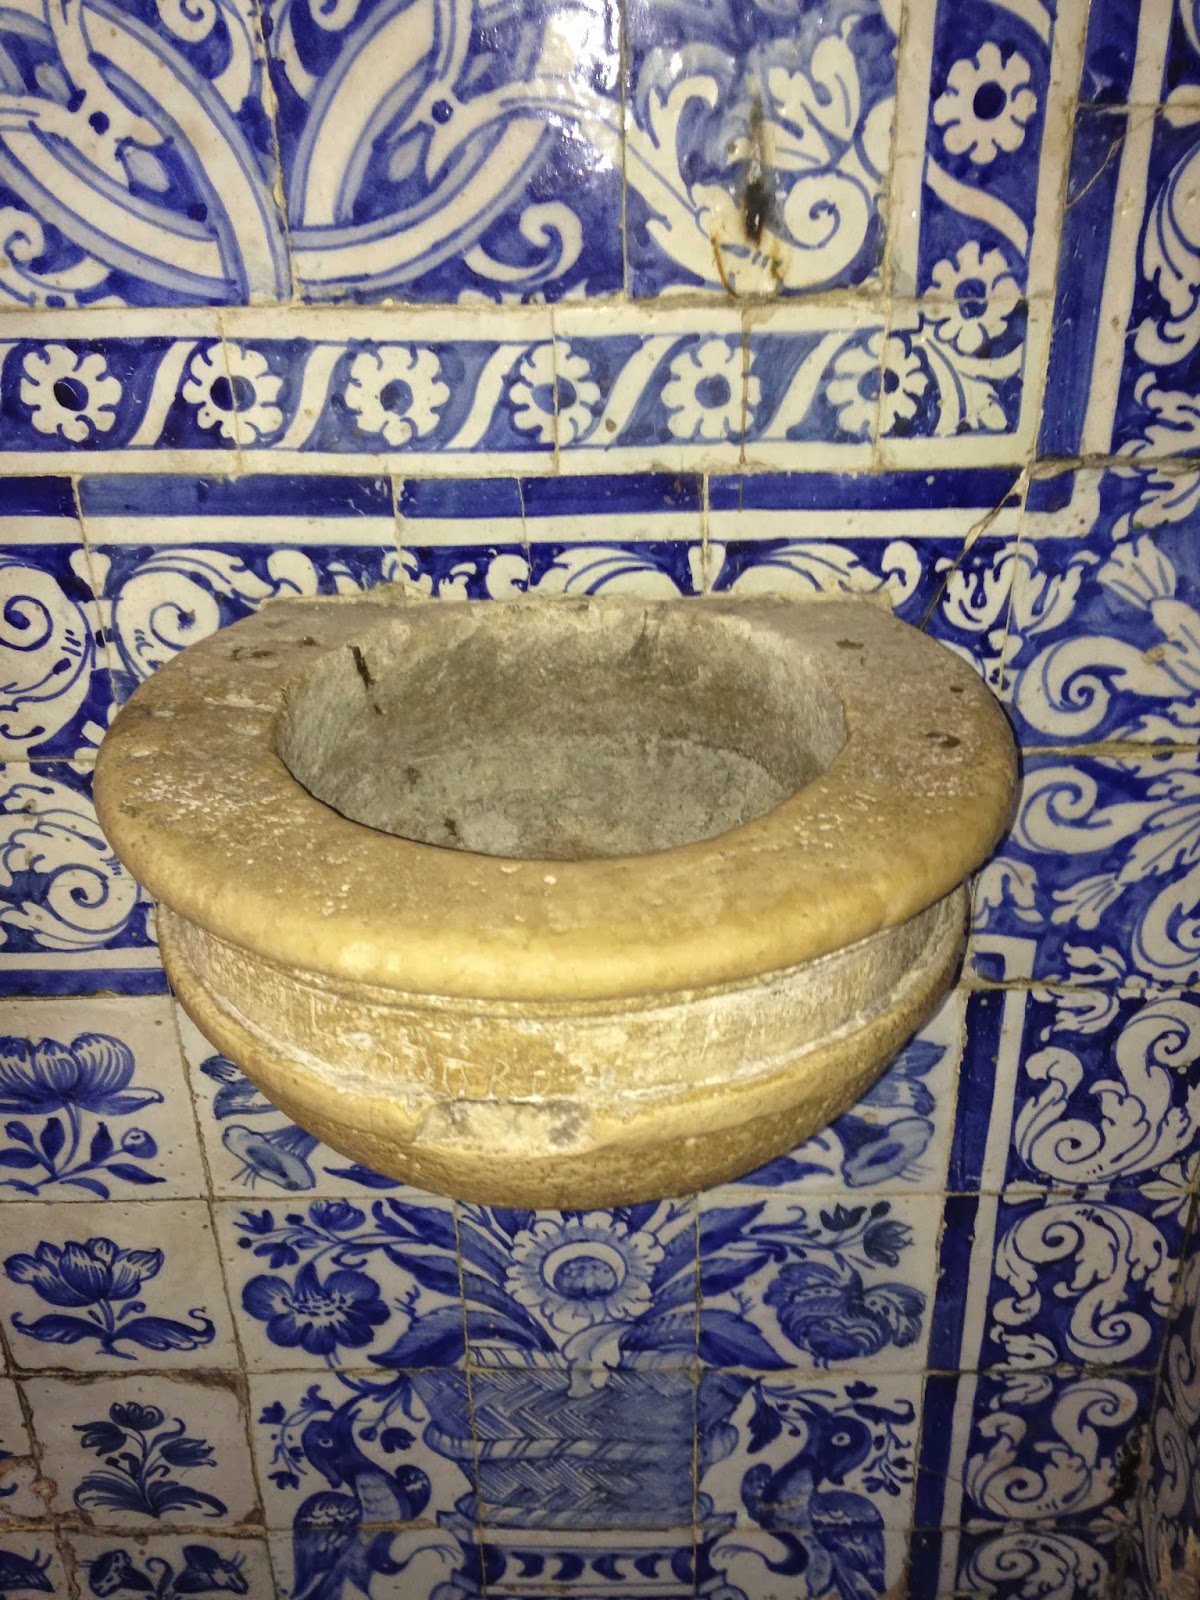 Whole Wheat Rising: Holy Water Fonts of Portugal